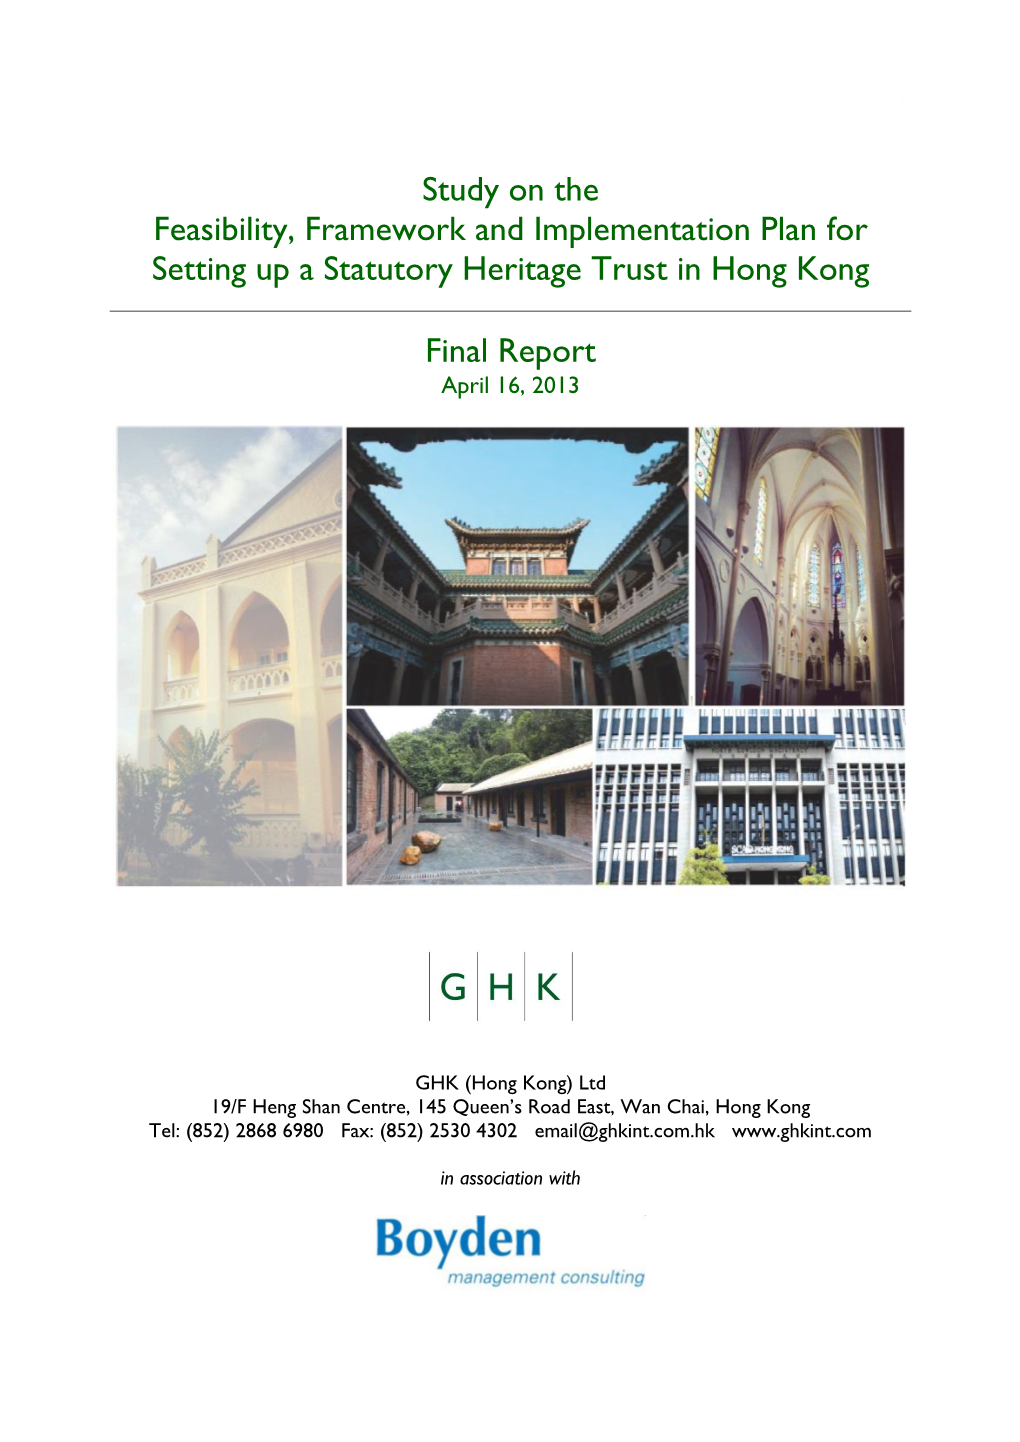 Study on the Feasibility, Framework and Implementation Plan for Setting up a Statutory Heritage Trust in Hong Kong